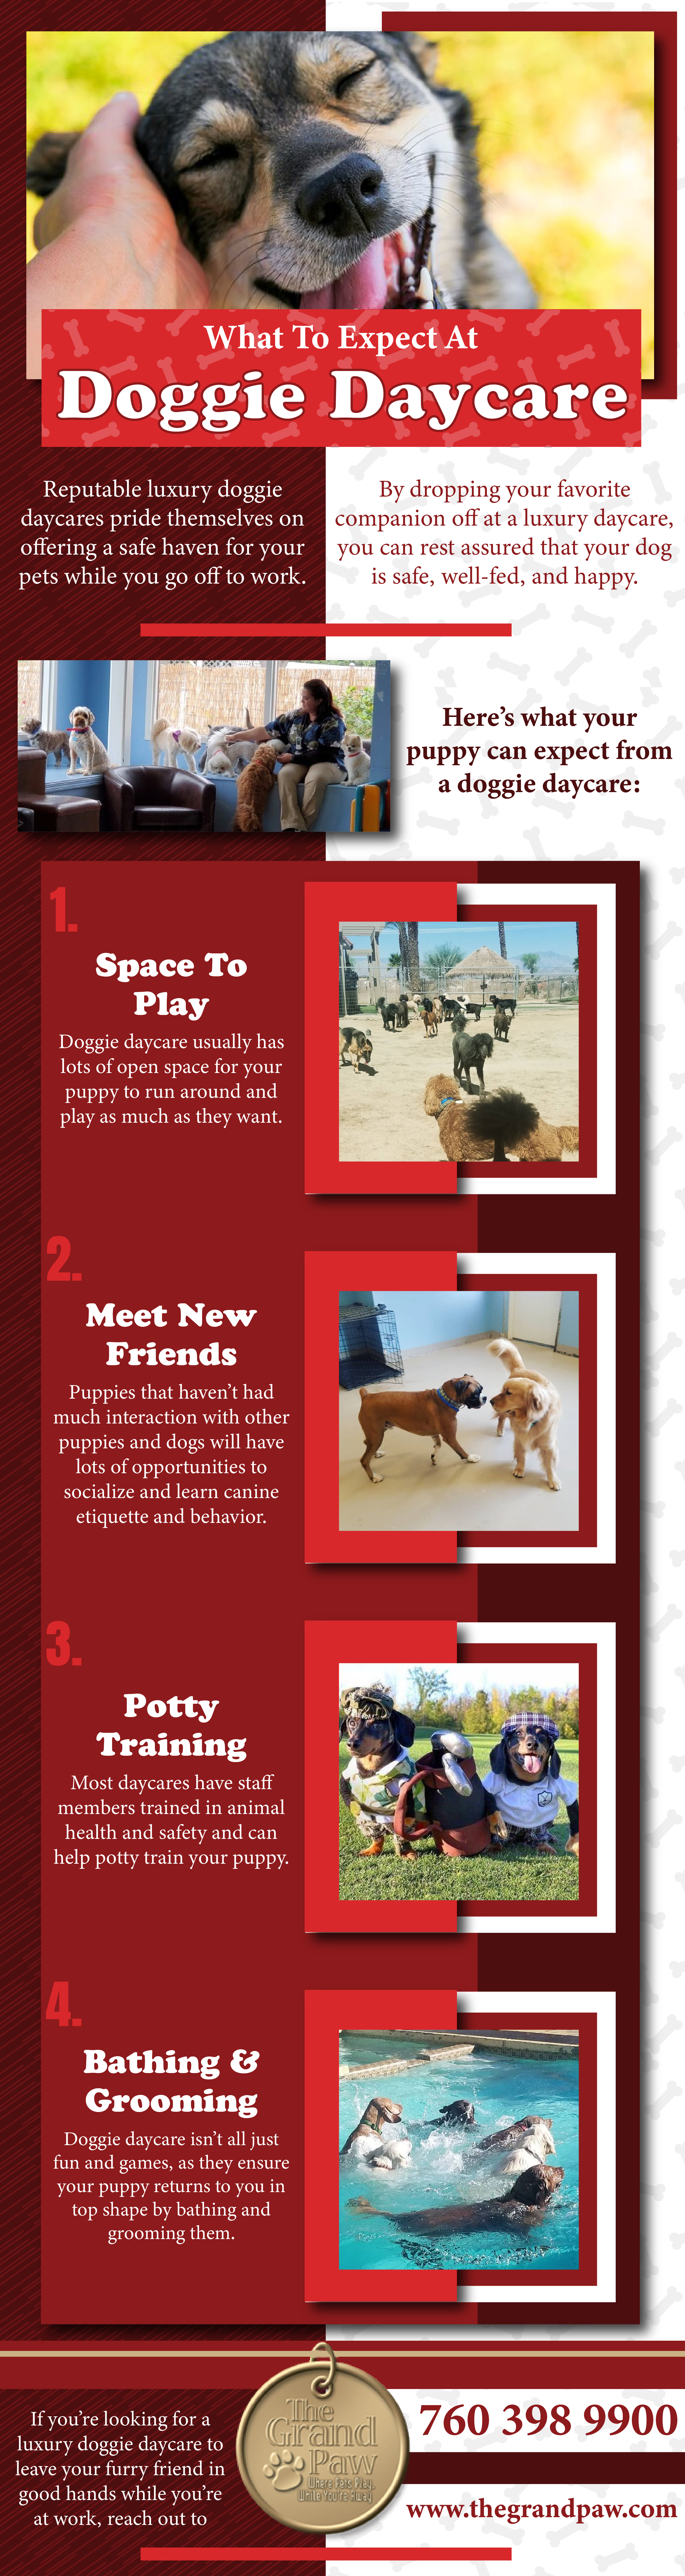 what to expect a ta doggie day care